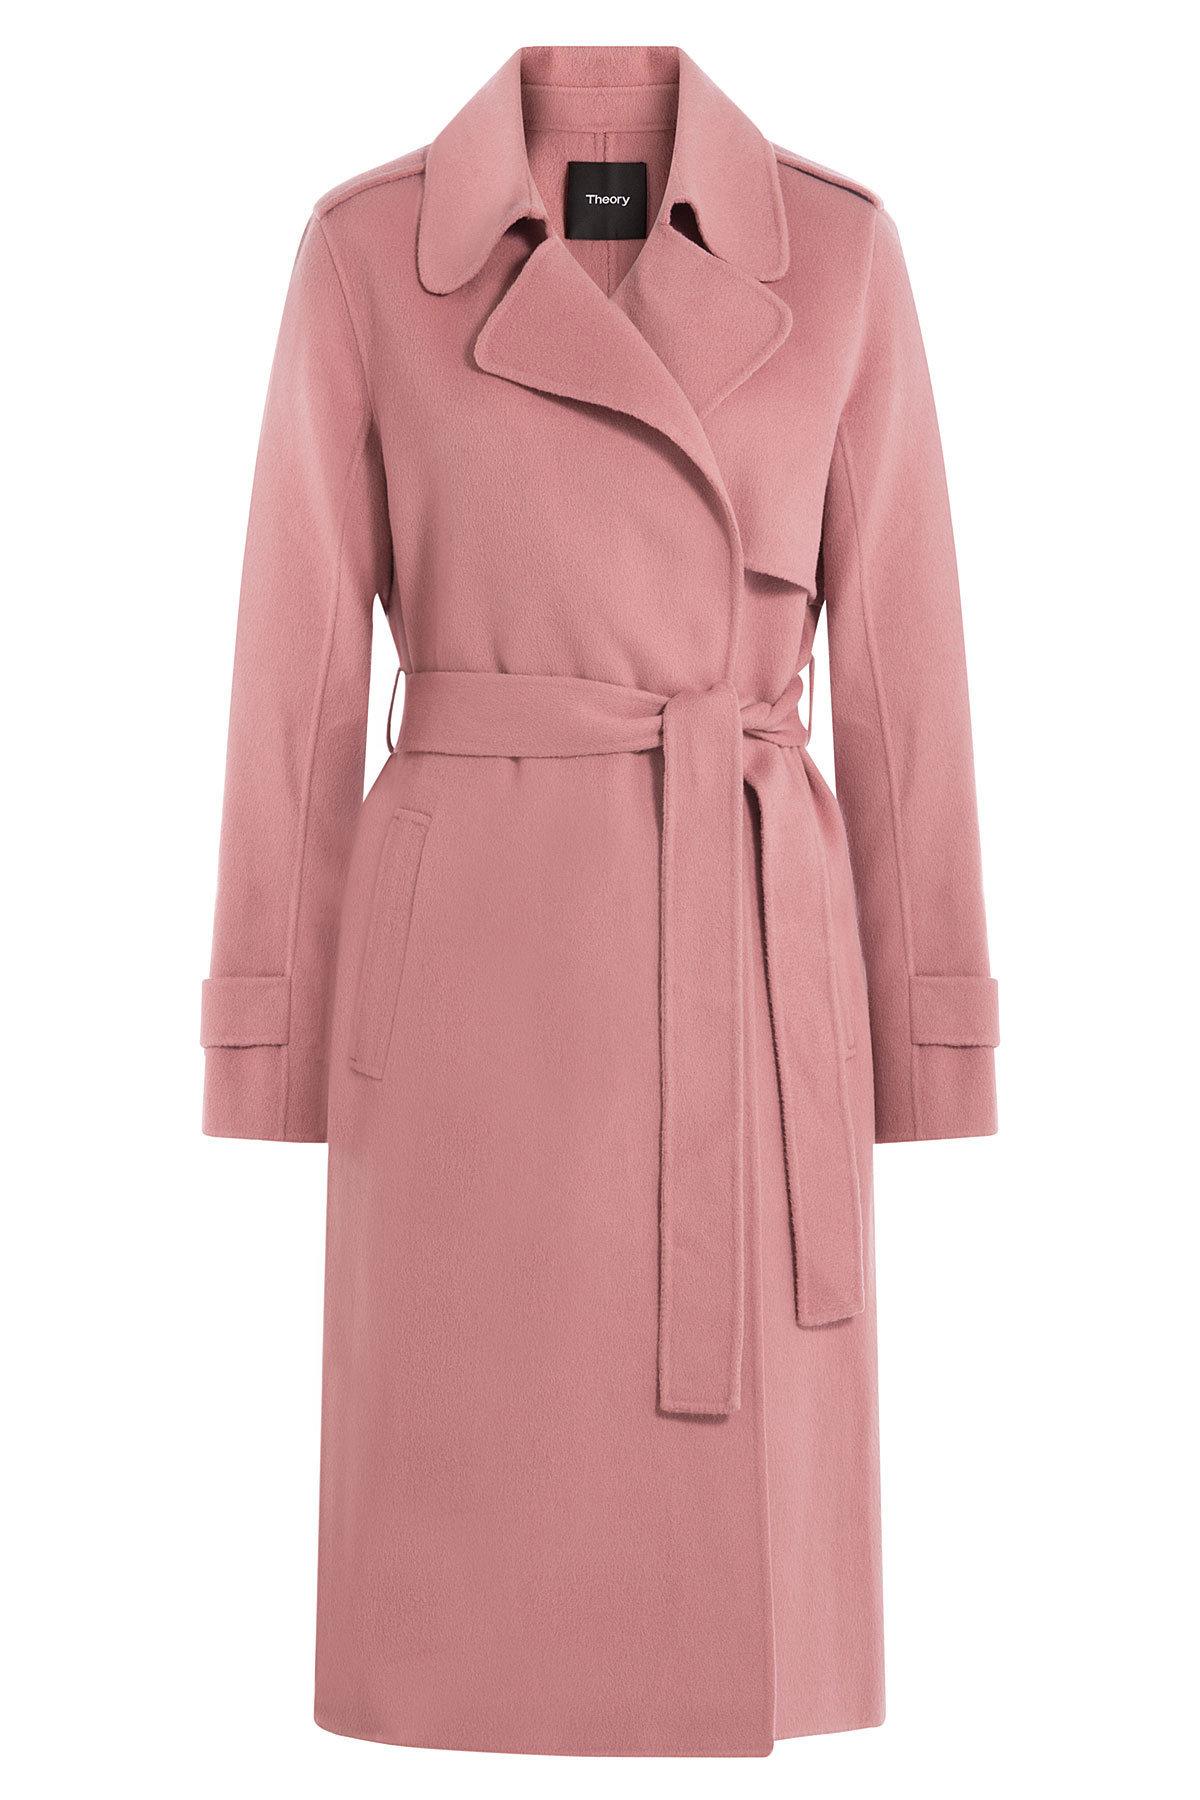 Theory Belted Wool Coat in Pink - Lyst